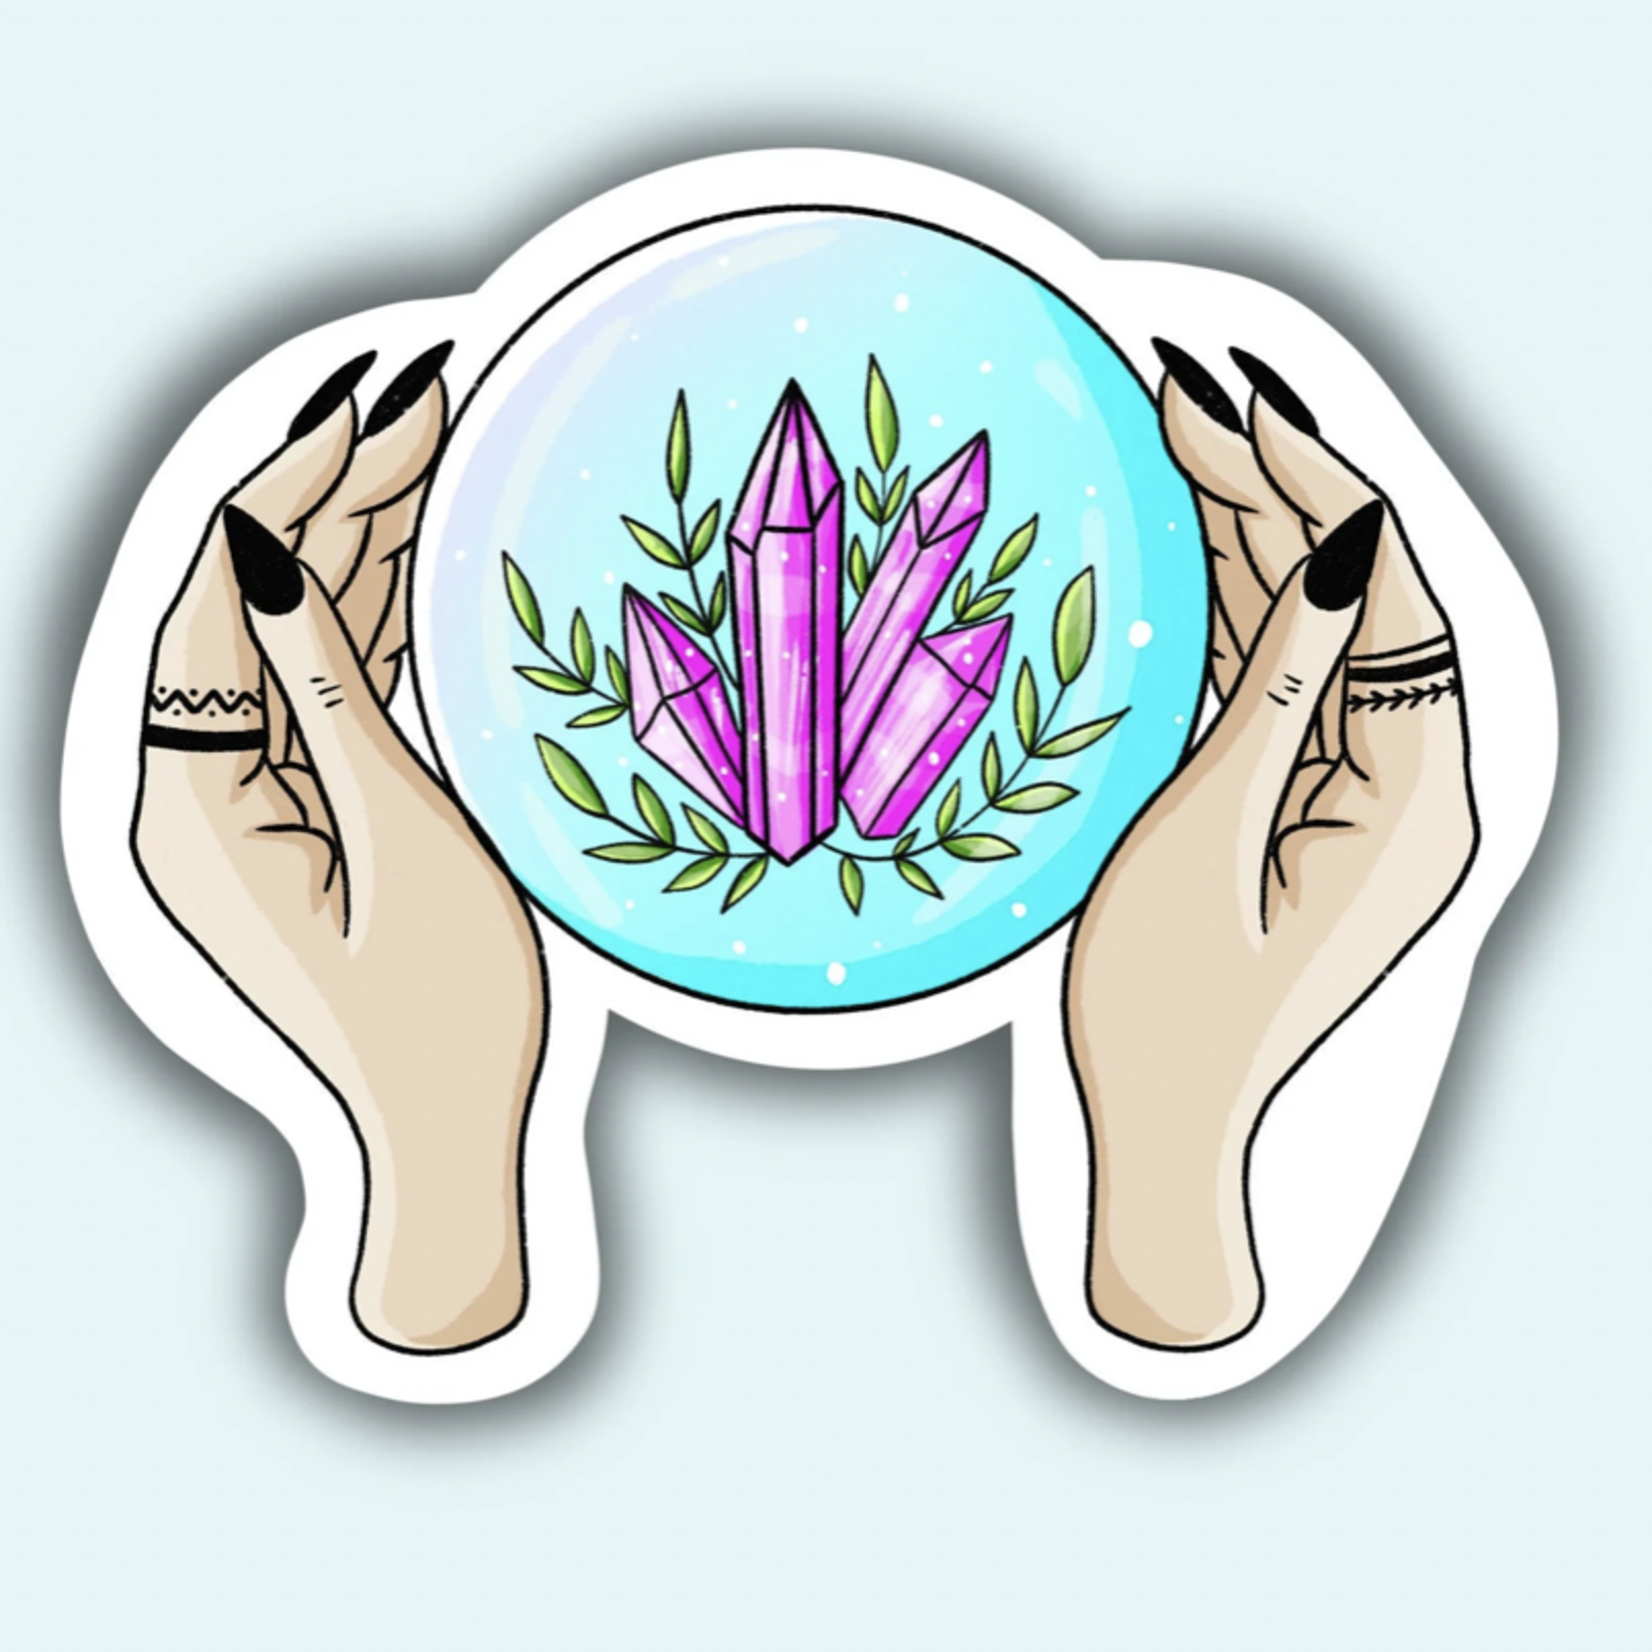 Witchy Hands Crystal Ball Sticker